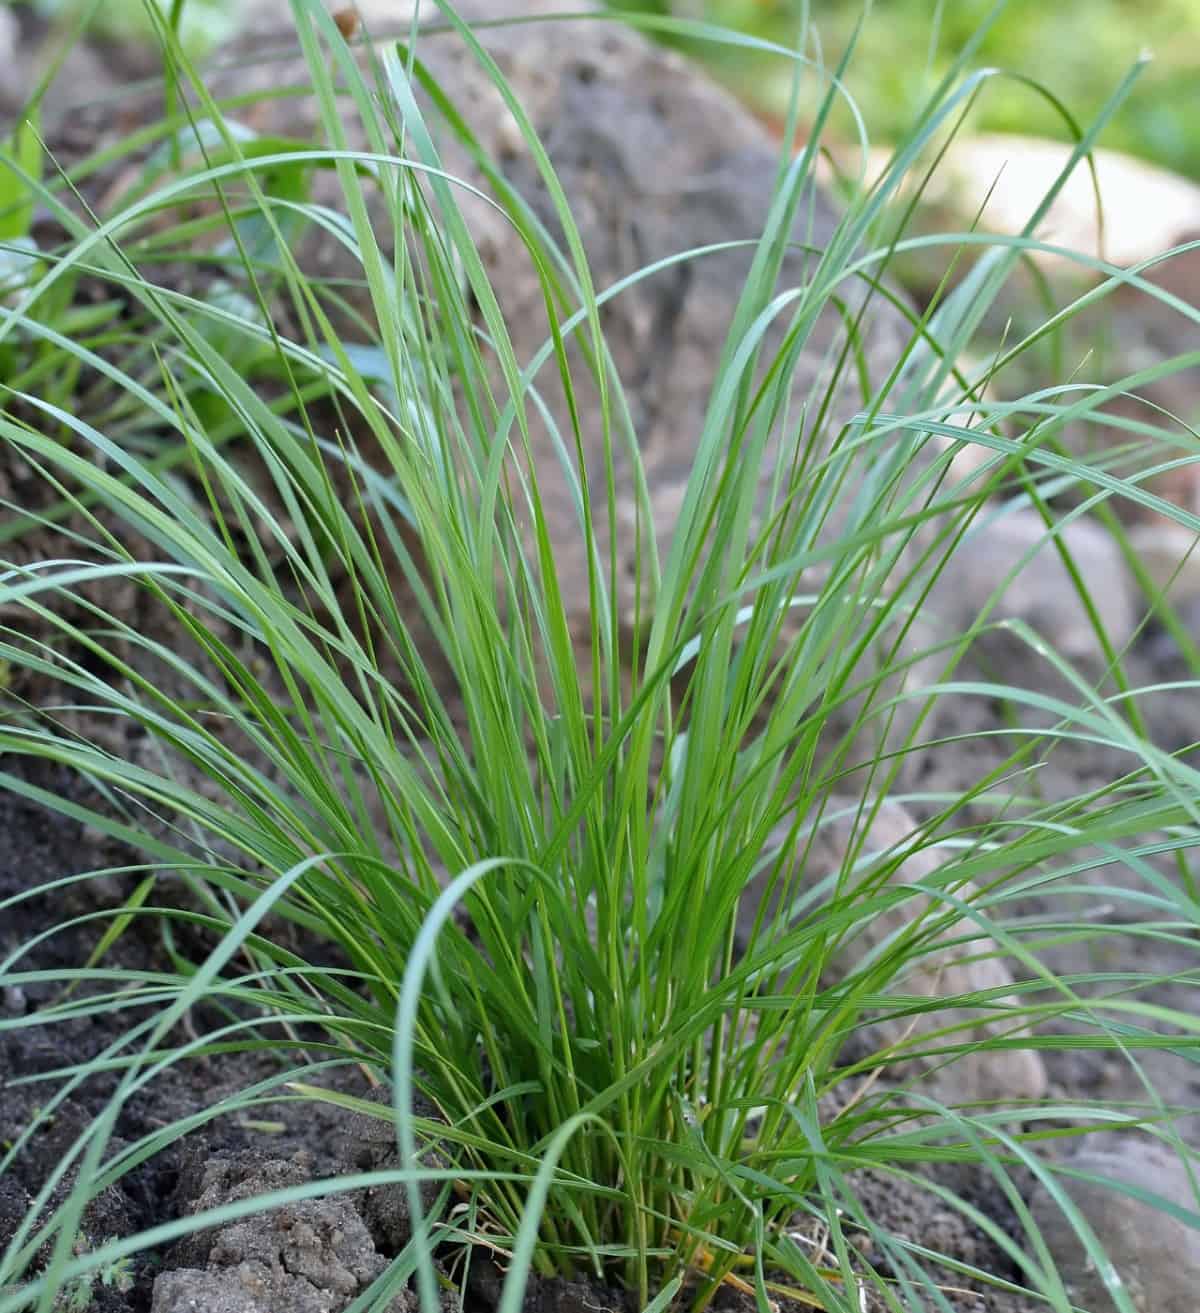 Unlike many other grasses, tufted hair grass doesn't mind partial shade.